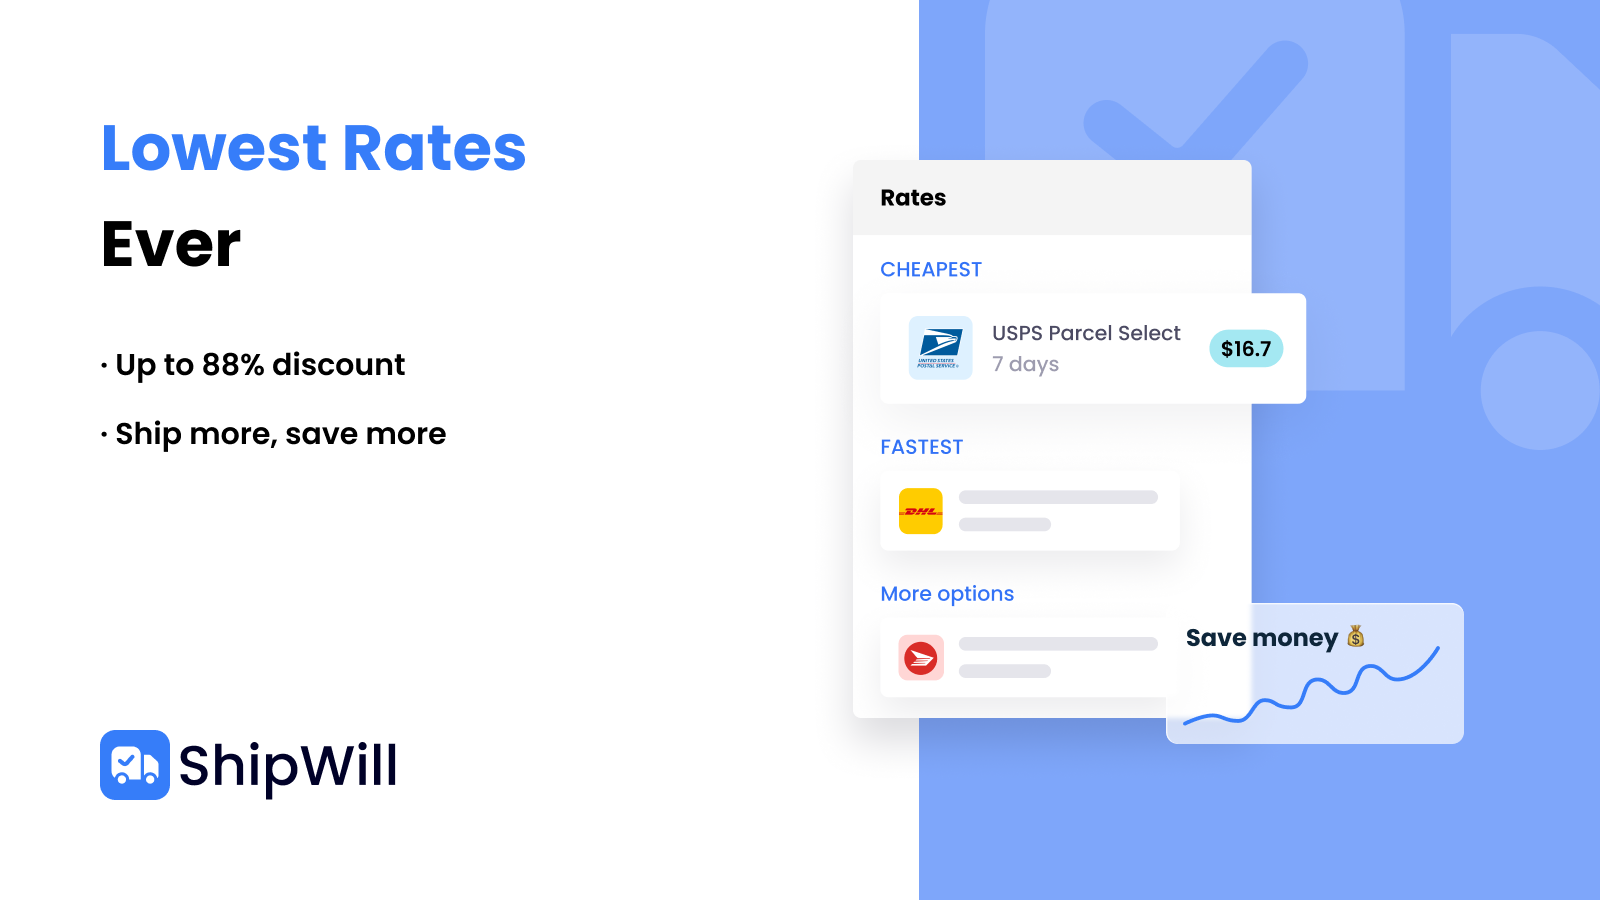 Lowest rates ever